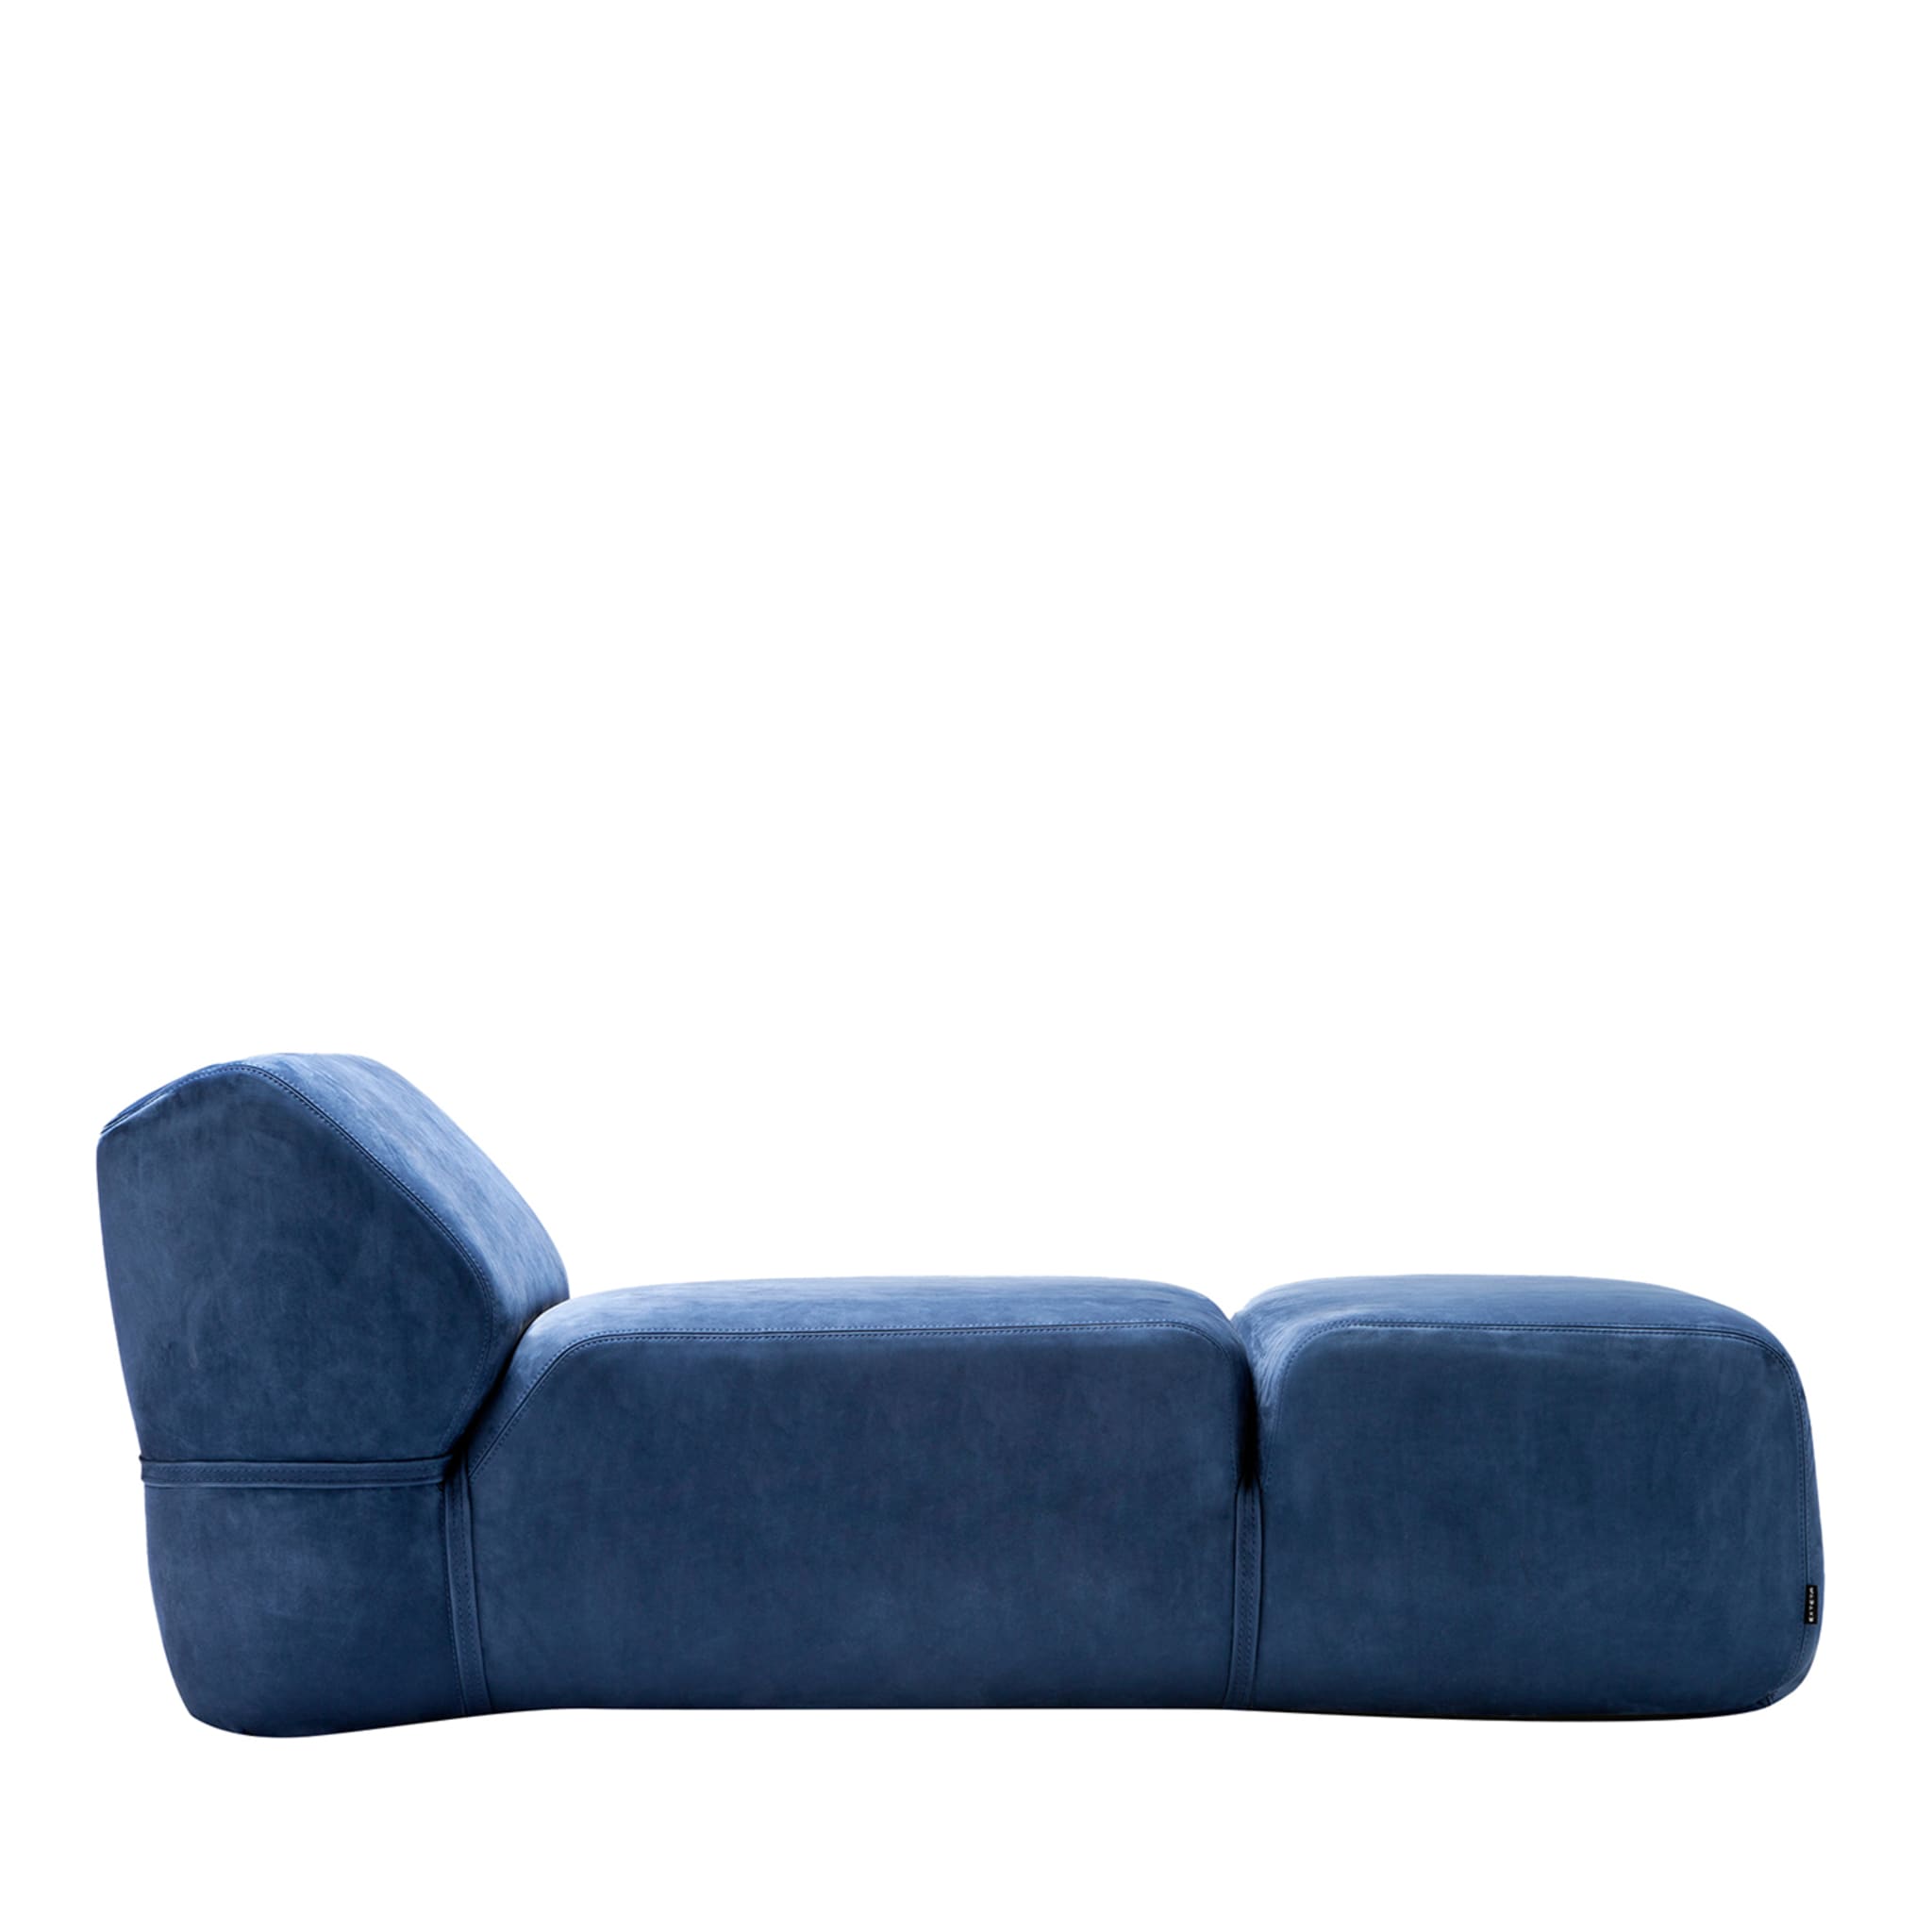 Soft Blue Chaise Longue by Ludovica + Roberto Palomba - Main view